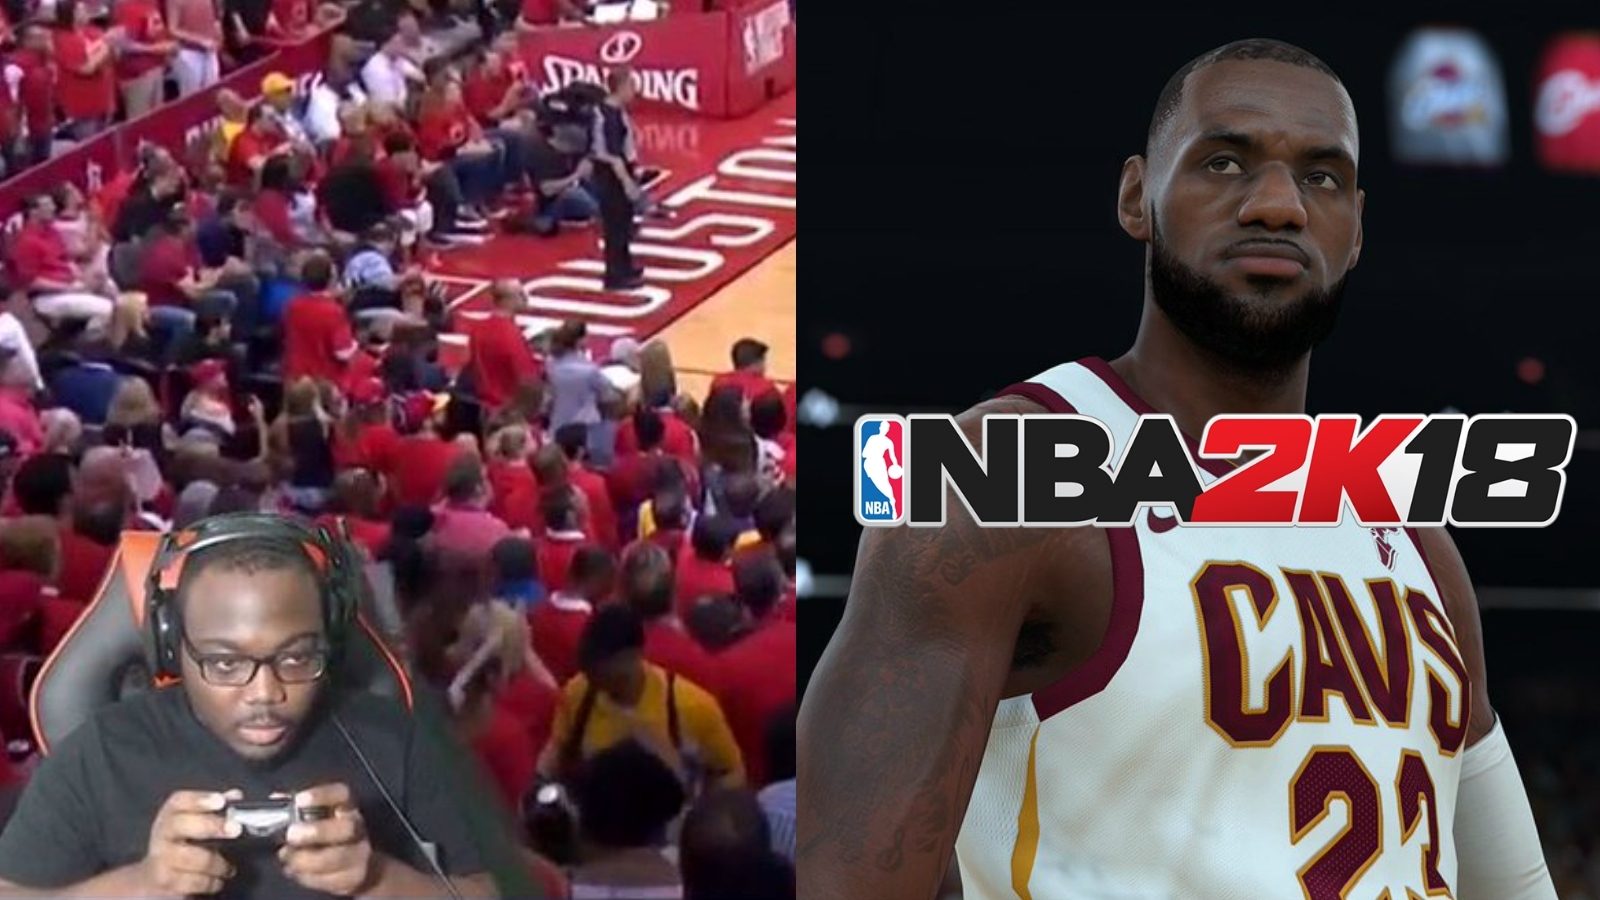 Streamer Back at it Again Broadcasting NBA Playoffs Pretends to Play NBA 2K18 to Avoid Twitch Ban